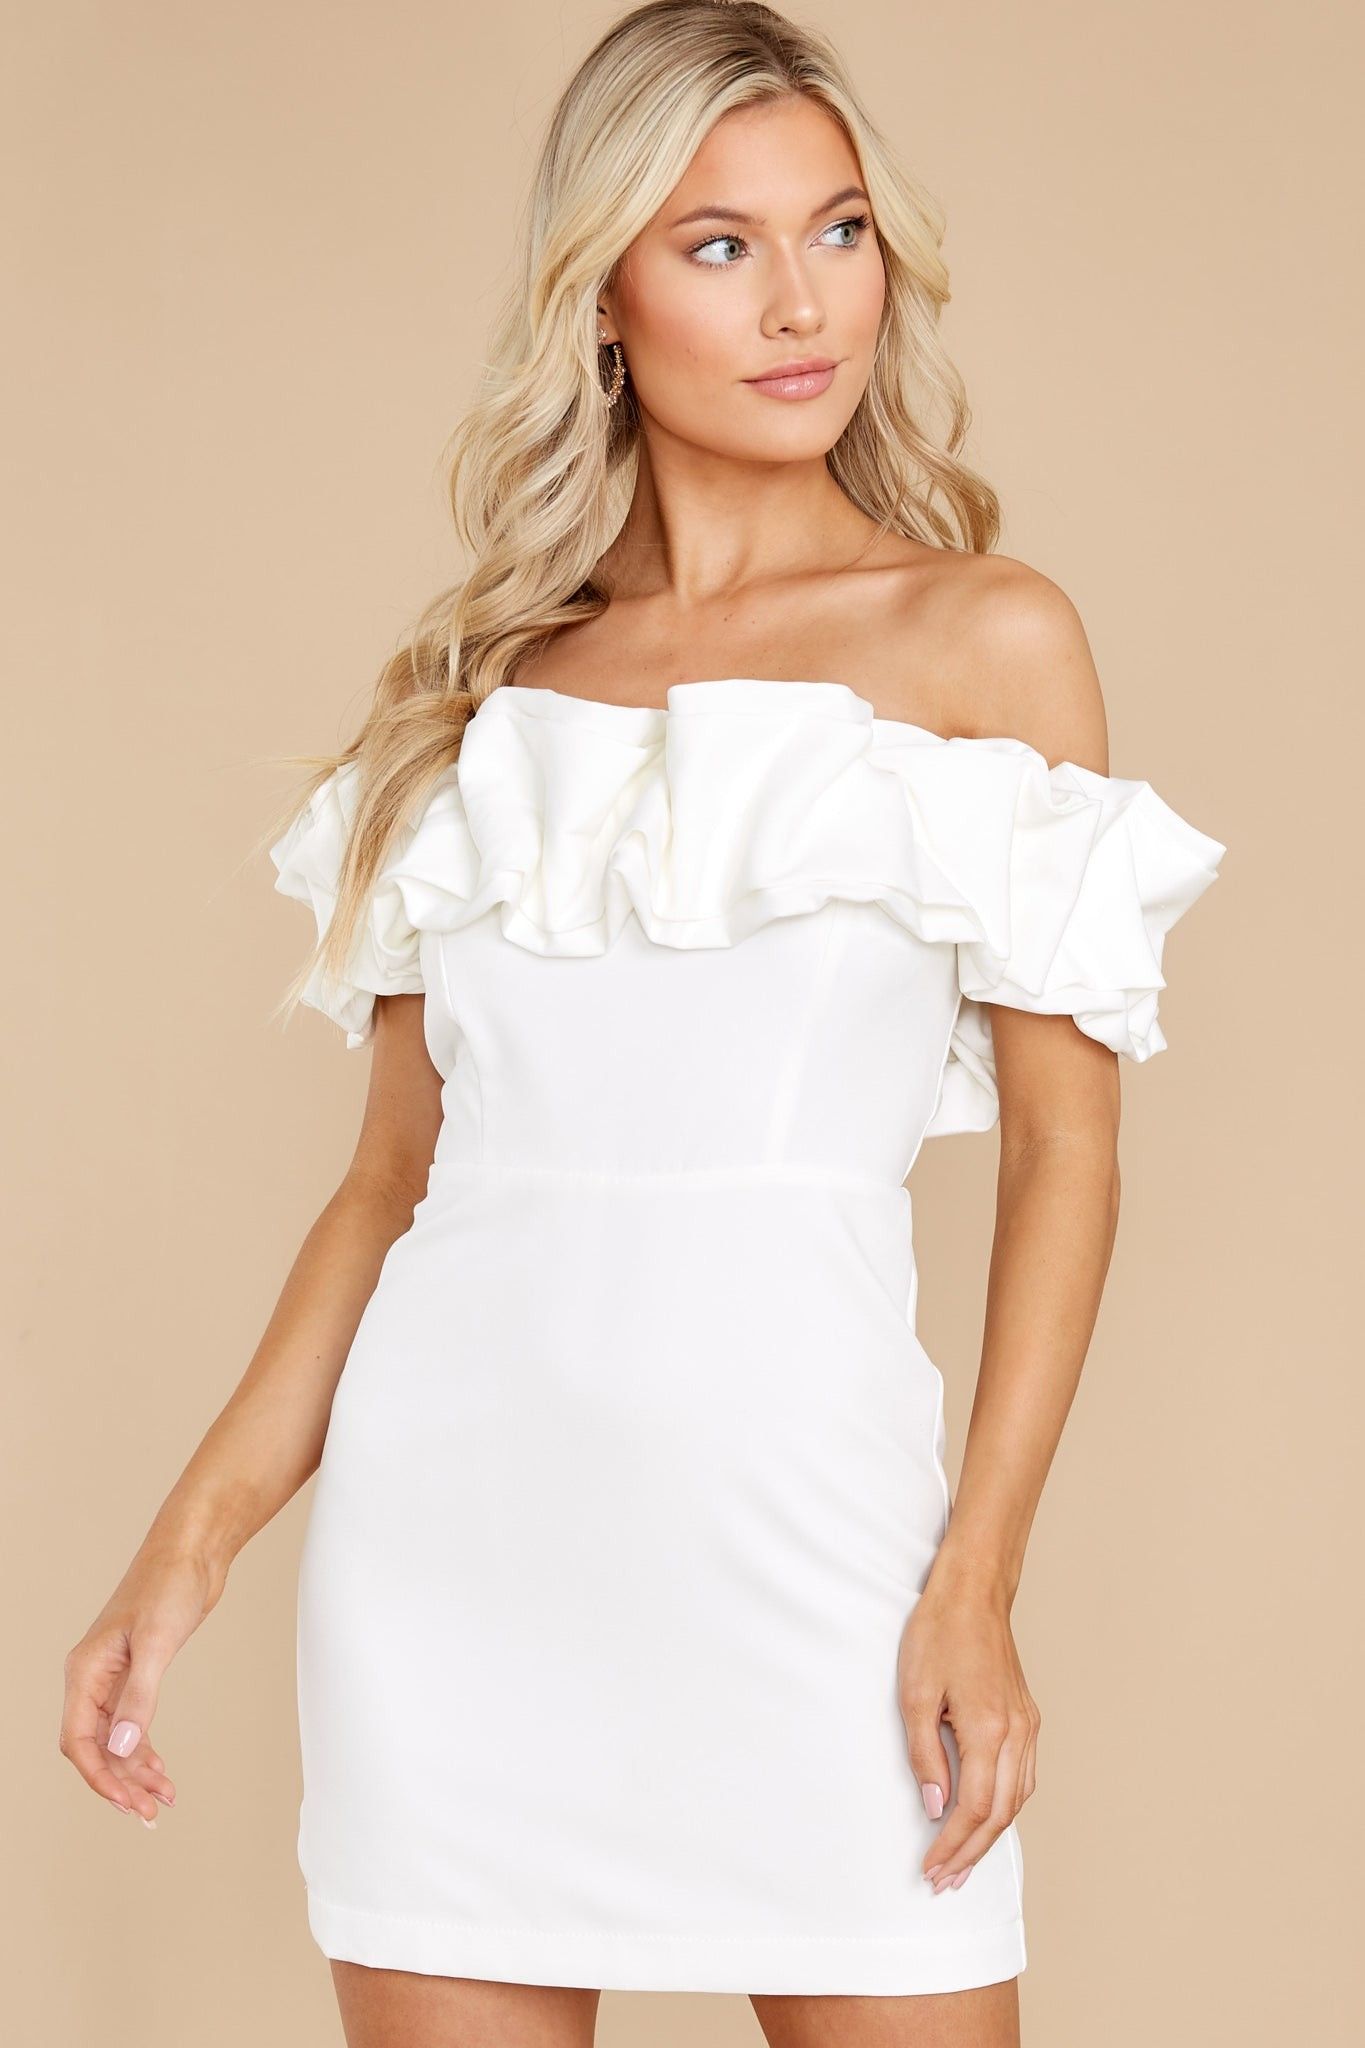 Elegant Sass White Dress - Red Dress Boutique - Bride To Be  | Red Dress 